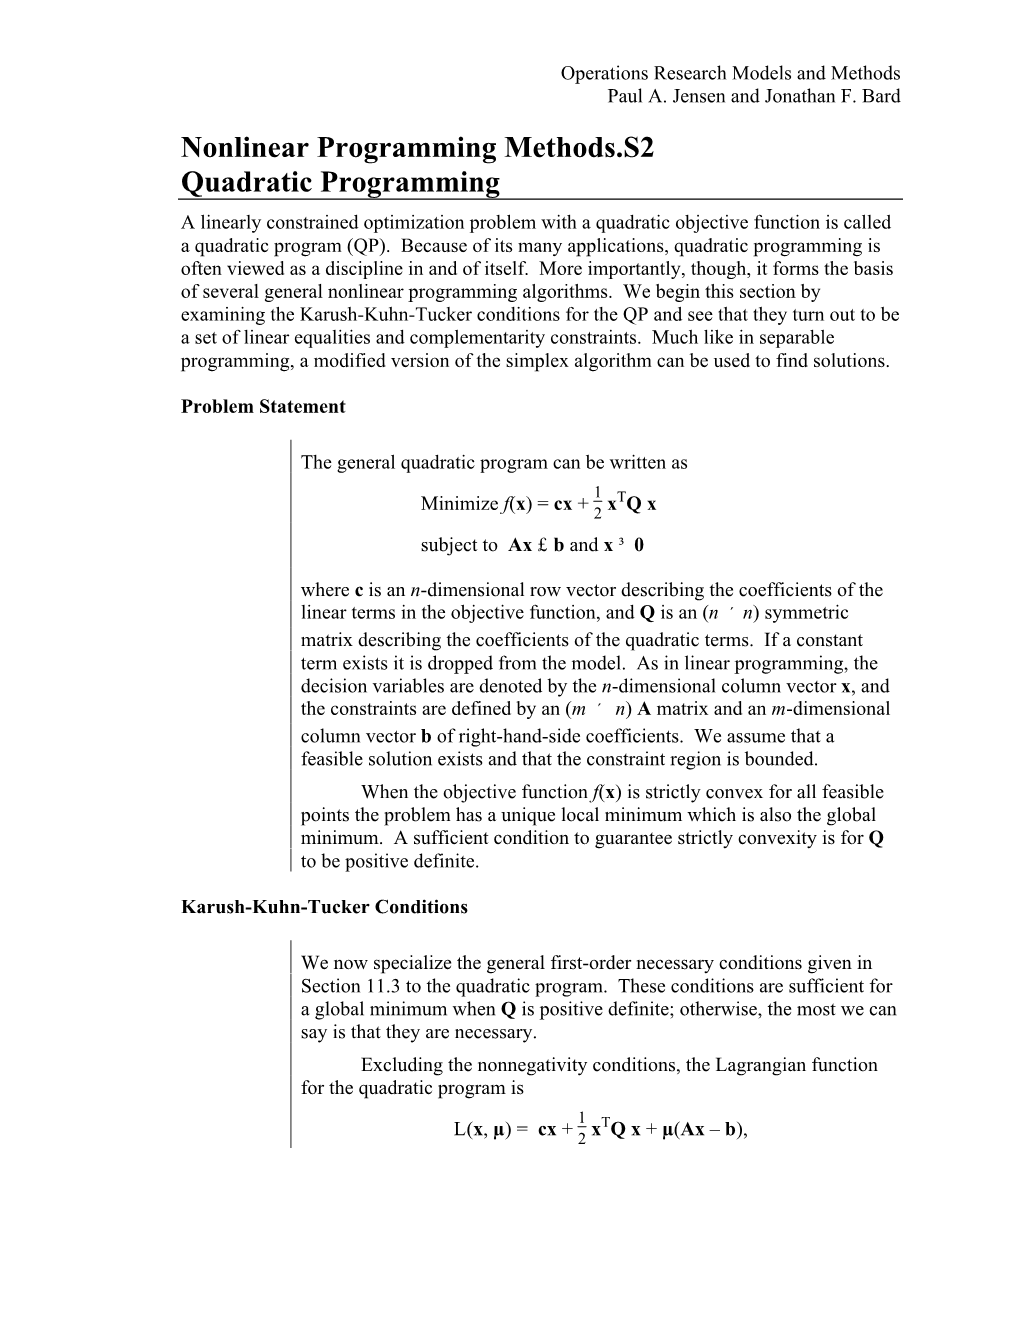 Quadratic Programming a Linearly Constrained Optimization Problem with a Quadratic Objective Function Is Called a Quadratic Program (QP)